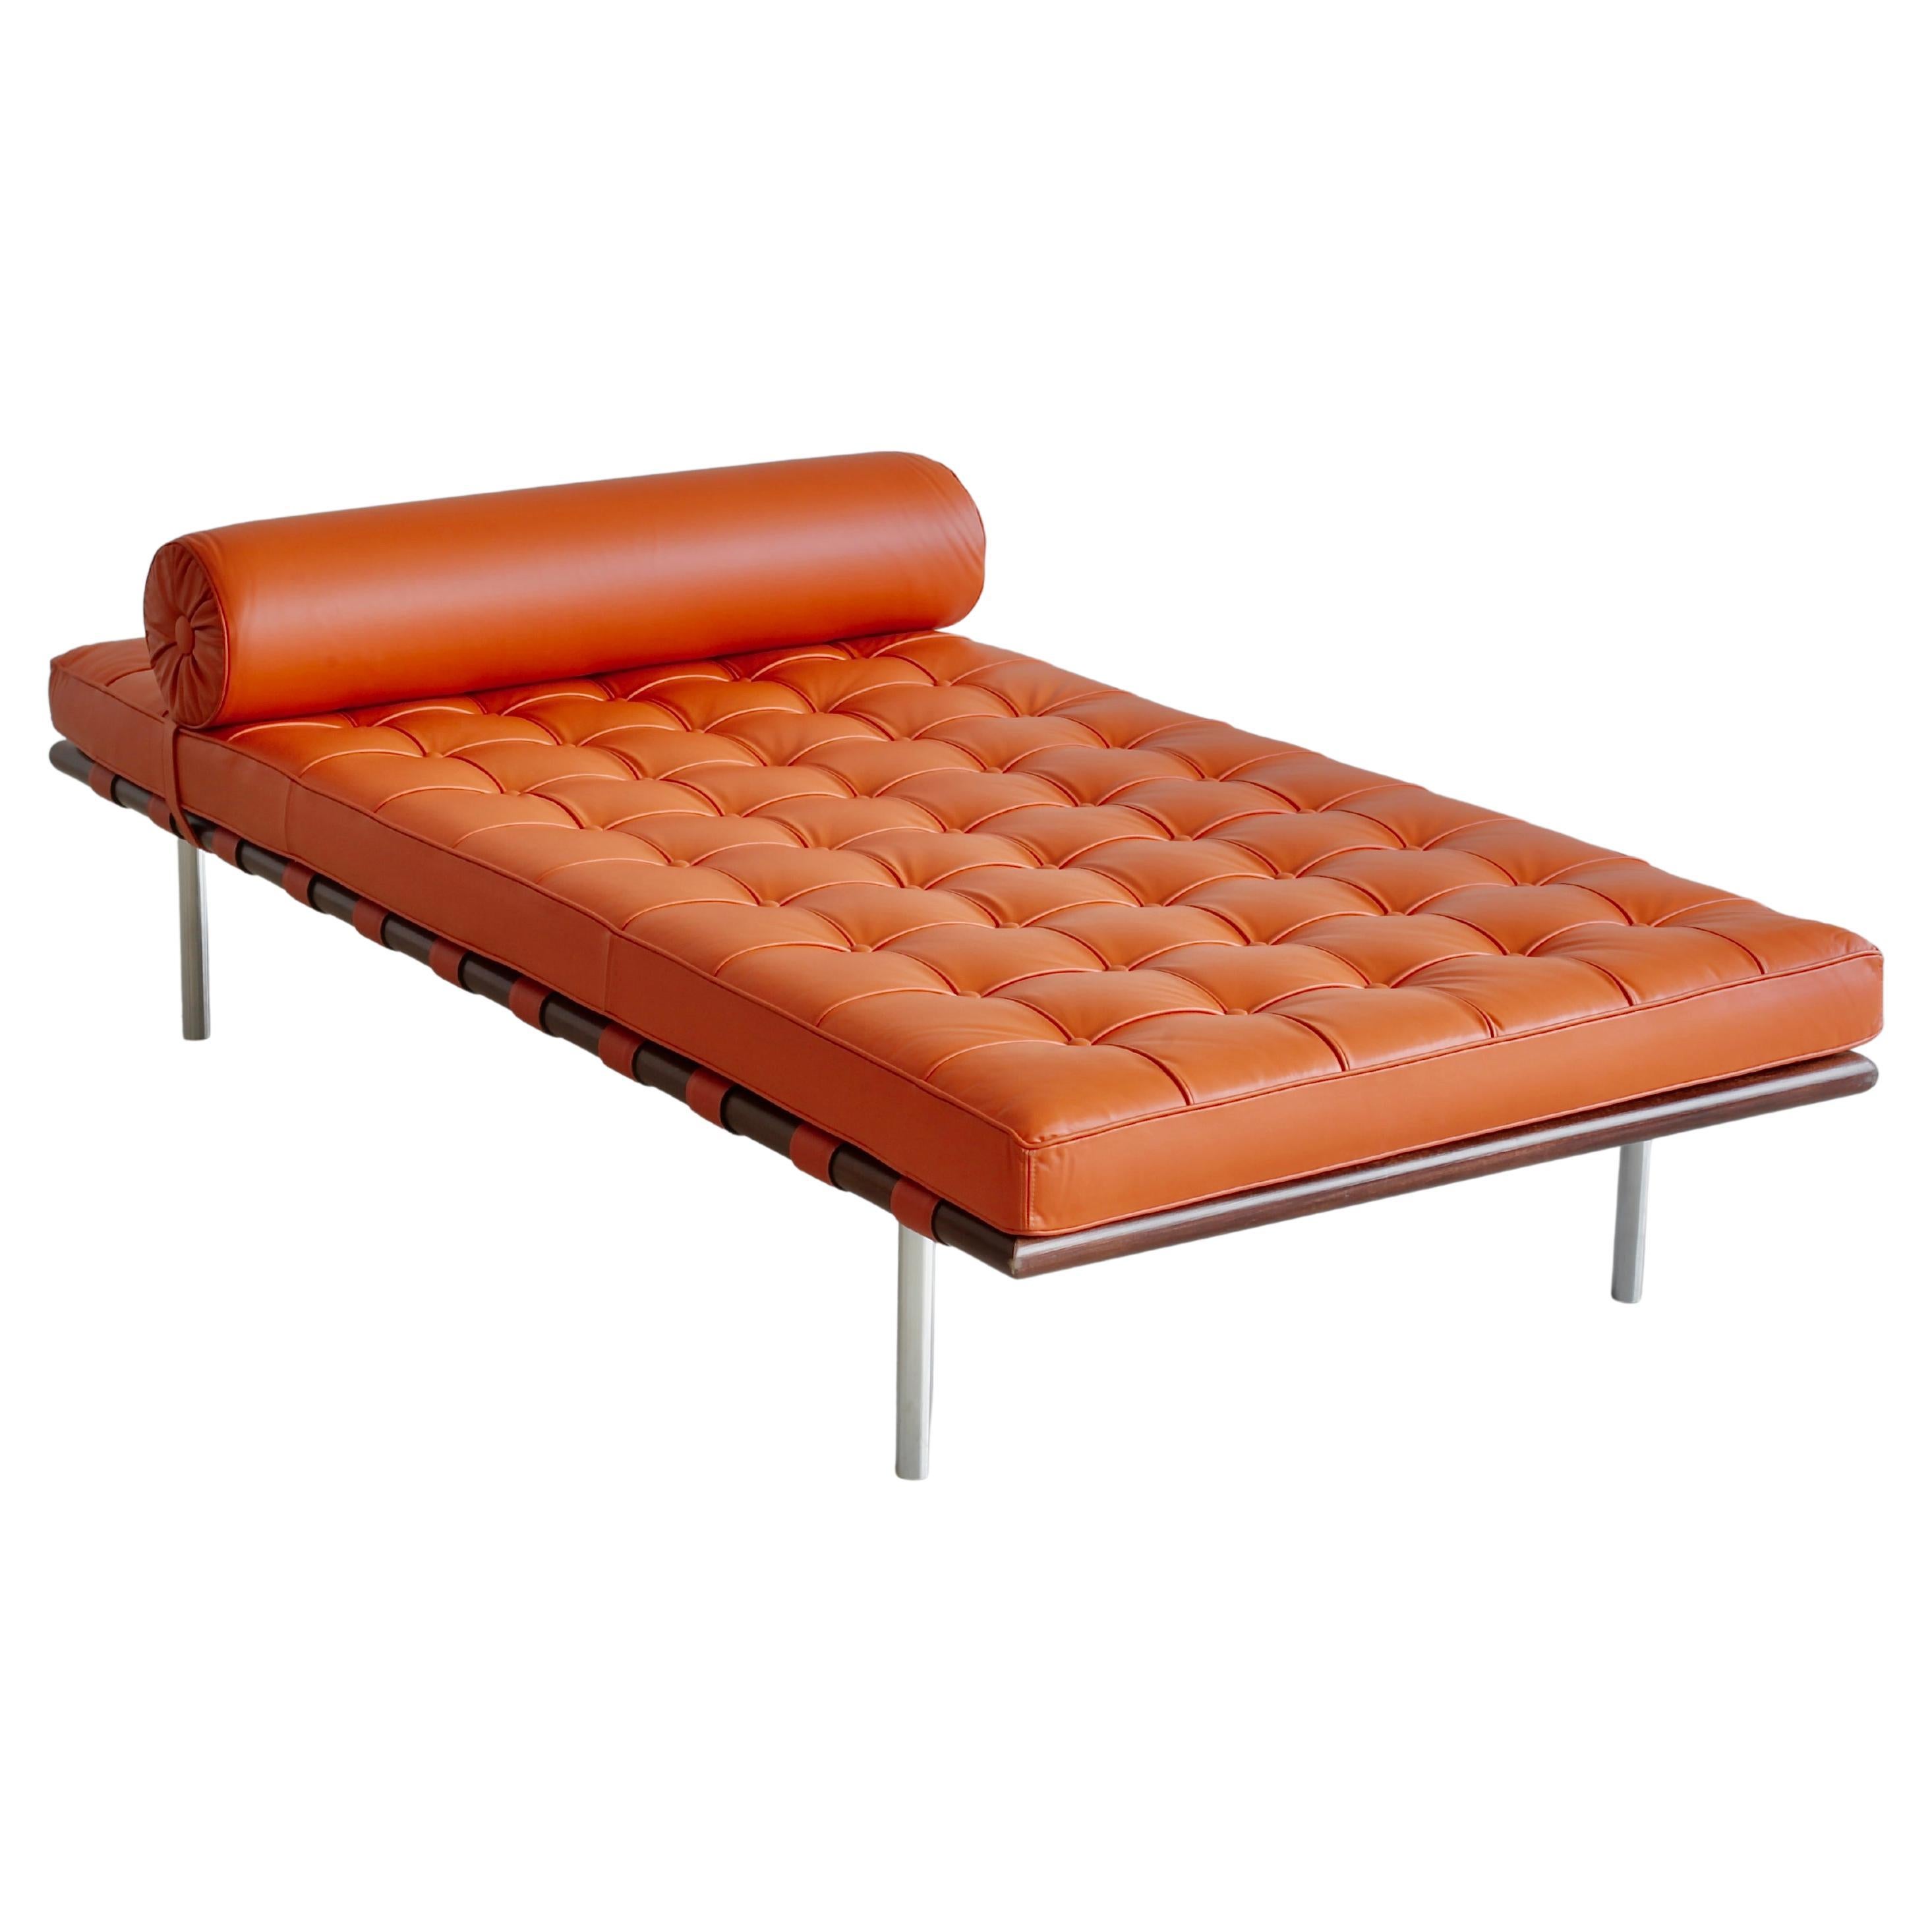 Daybed designed by Mies van der Rohe. U.S.A., Knoll International.